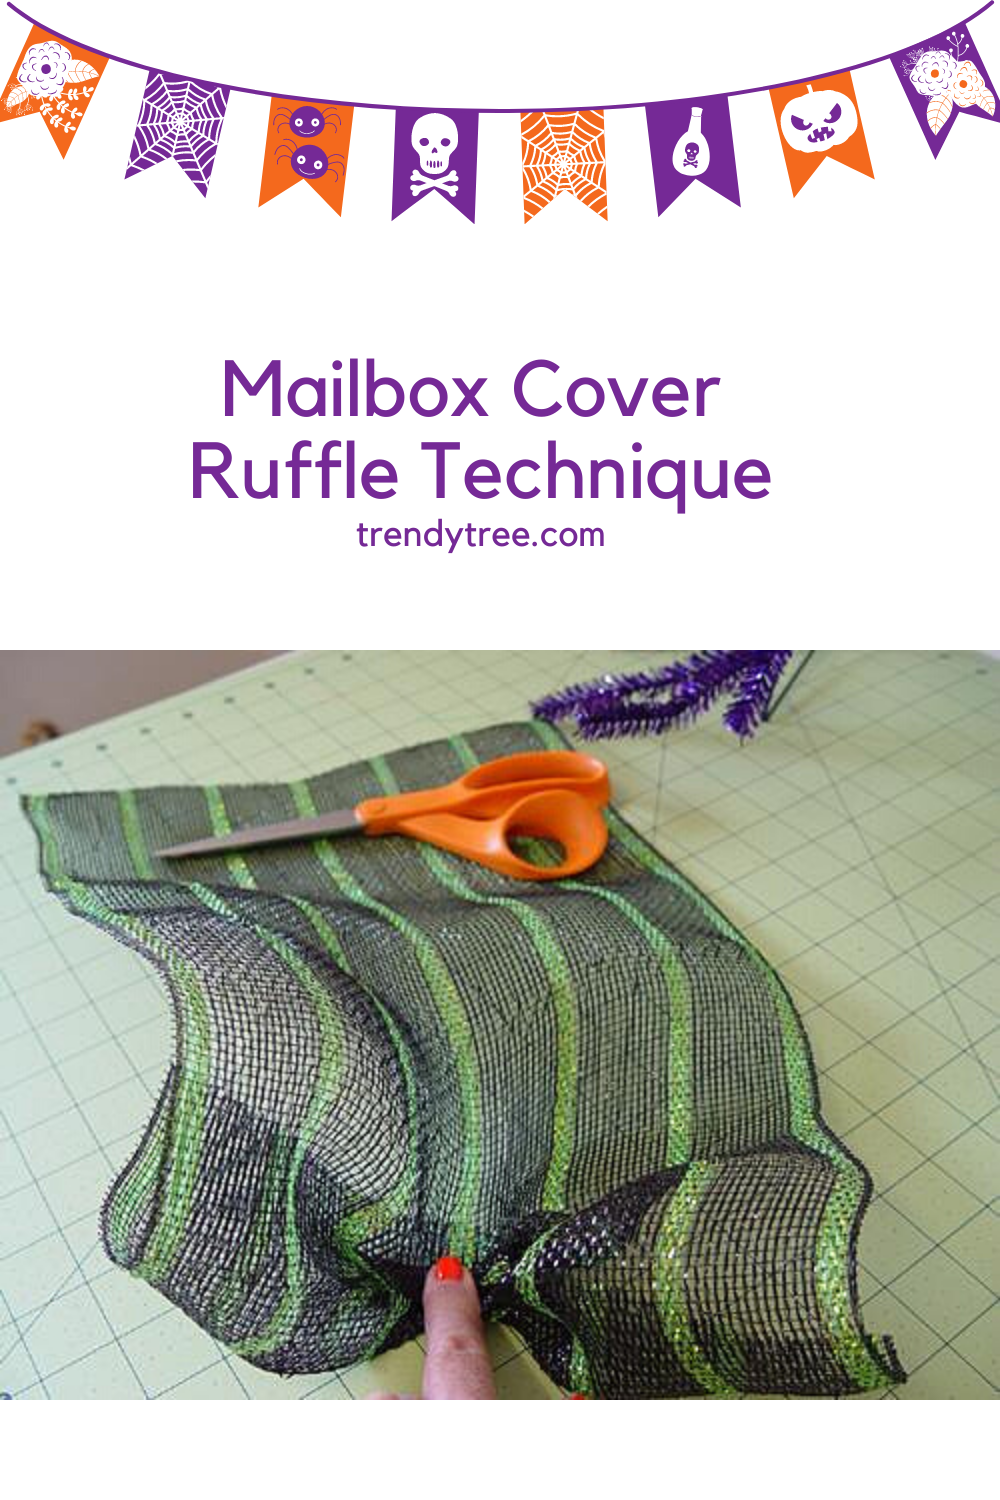 Ruffle technique for a mailbox cover using Deco Mesh from Trendy Tree